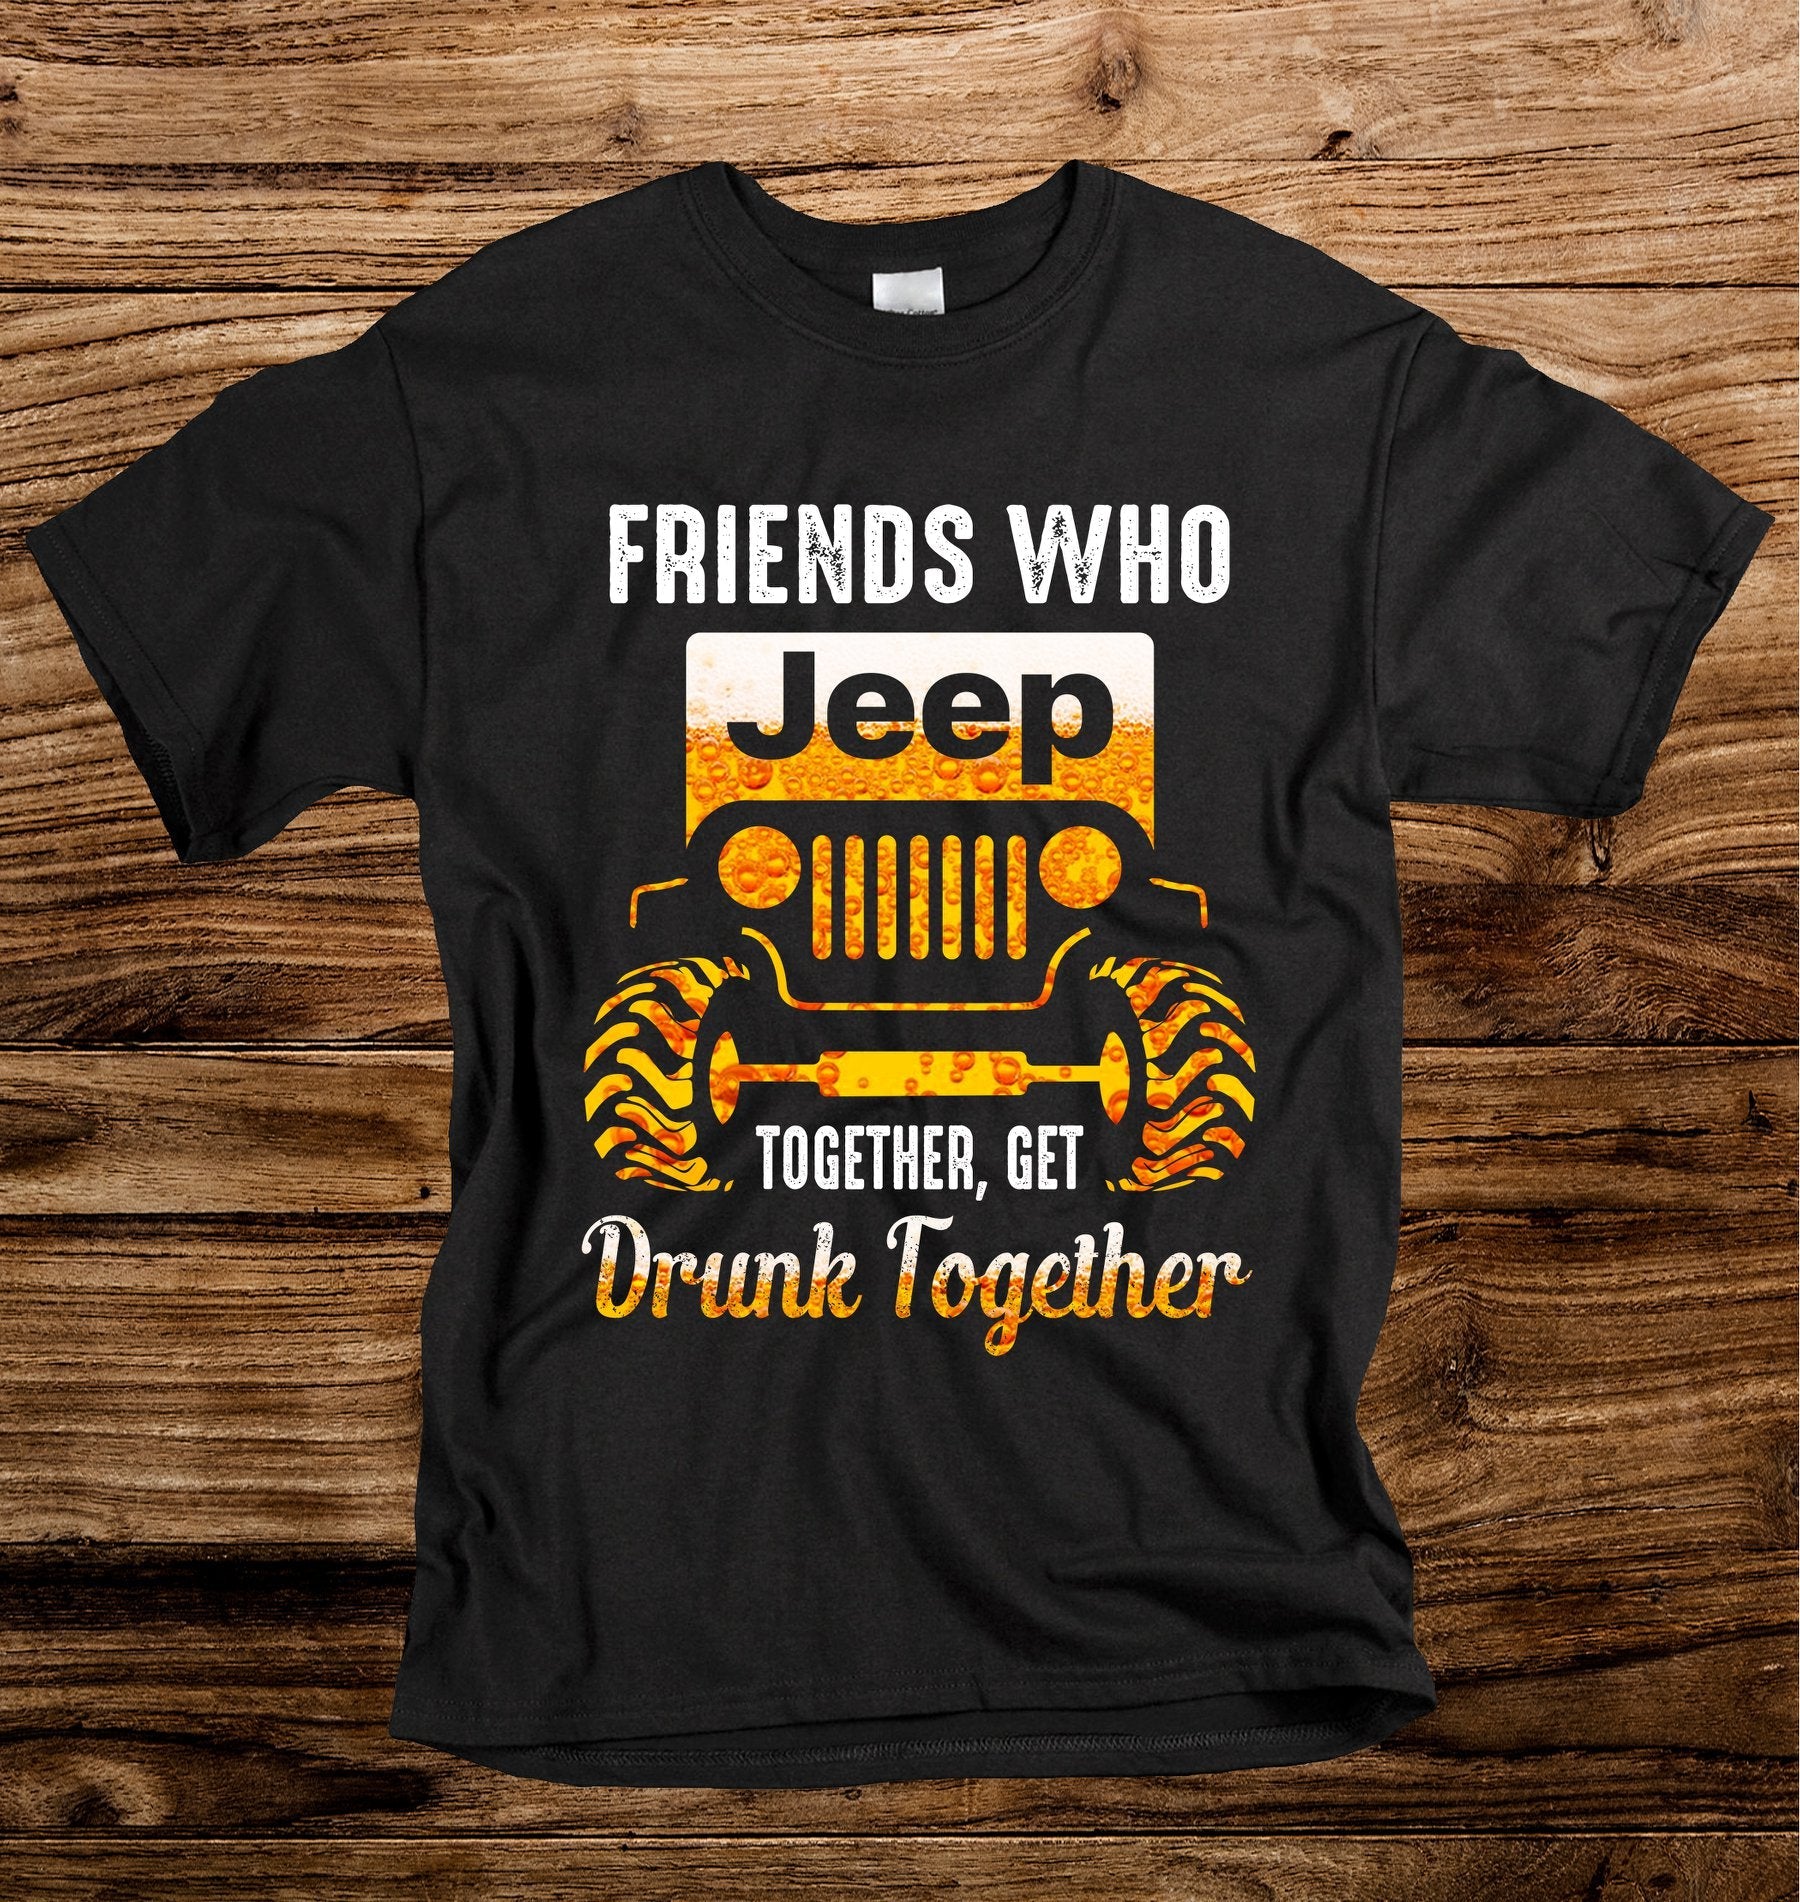 Drunk Together Car T-shirt and Hoodie 0823